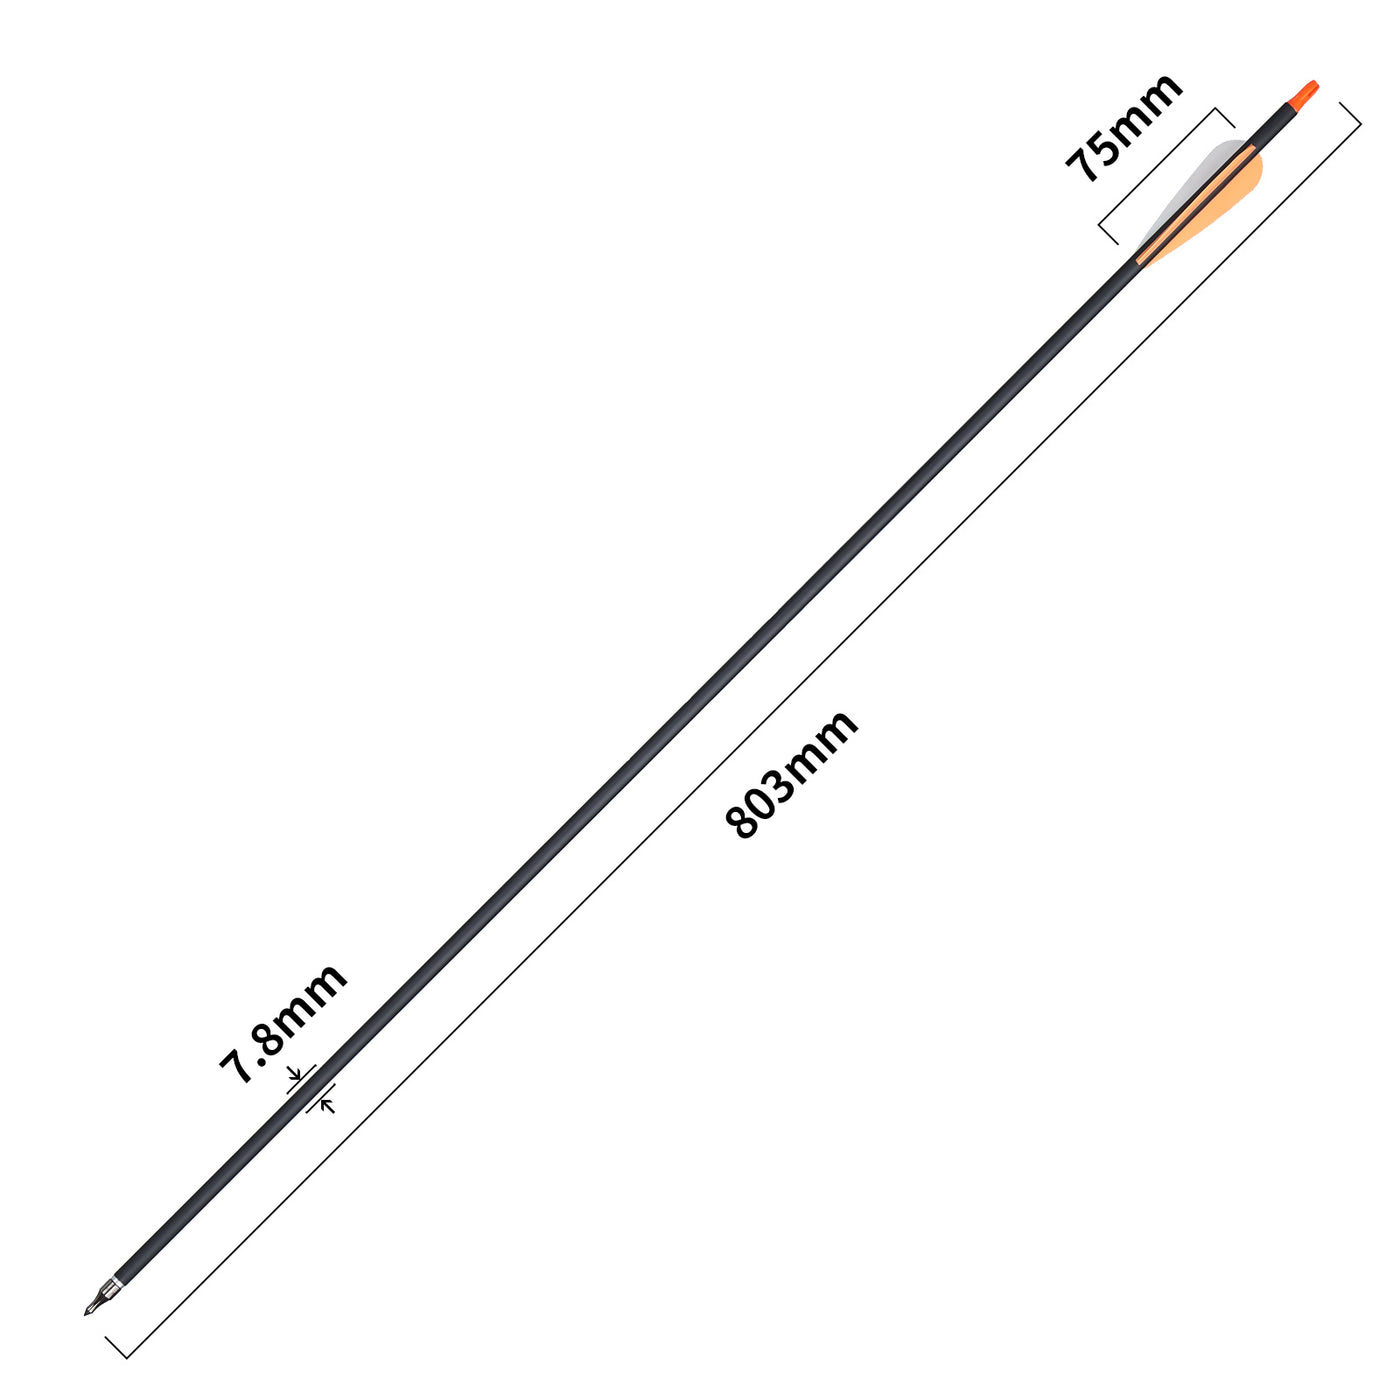 12x 31.5" OD 7.8mm ID 6.2mm Spine 500 Fletched Mixed Carbon Archery Arrows Replaceable Tips Orange-White Vane